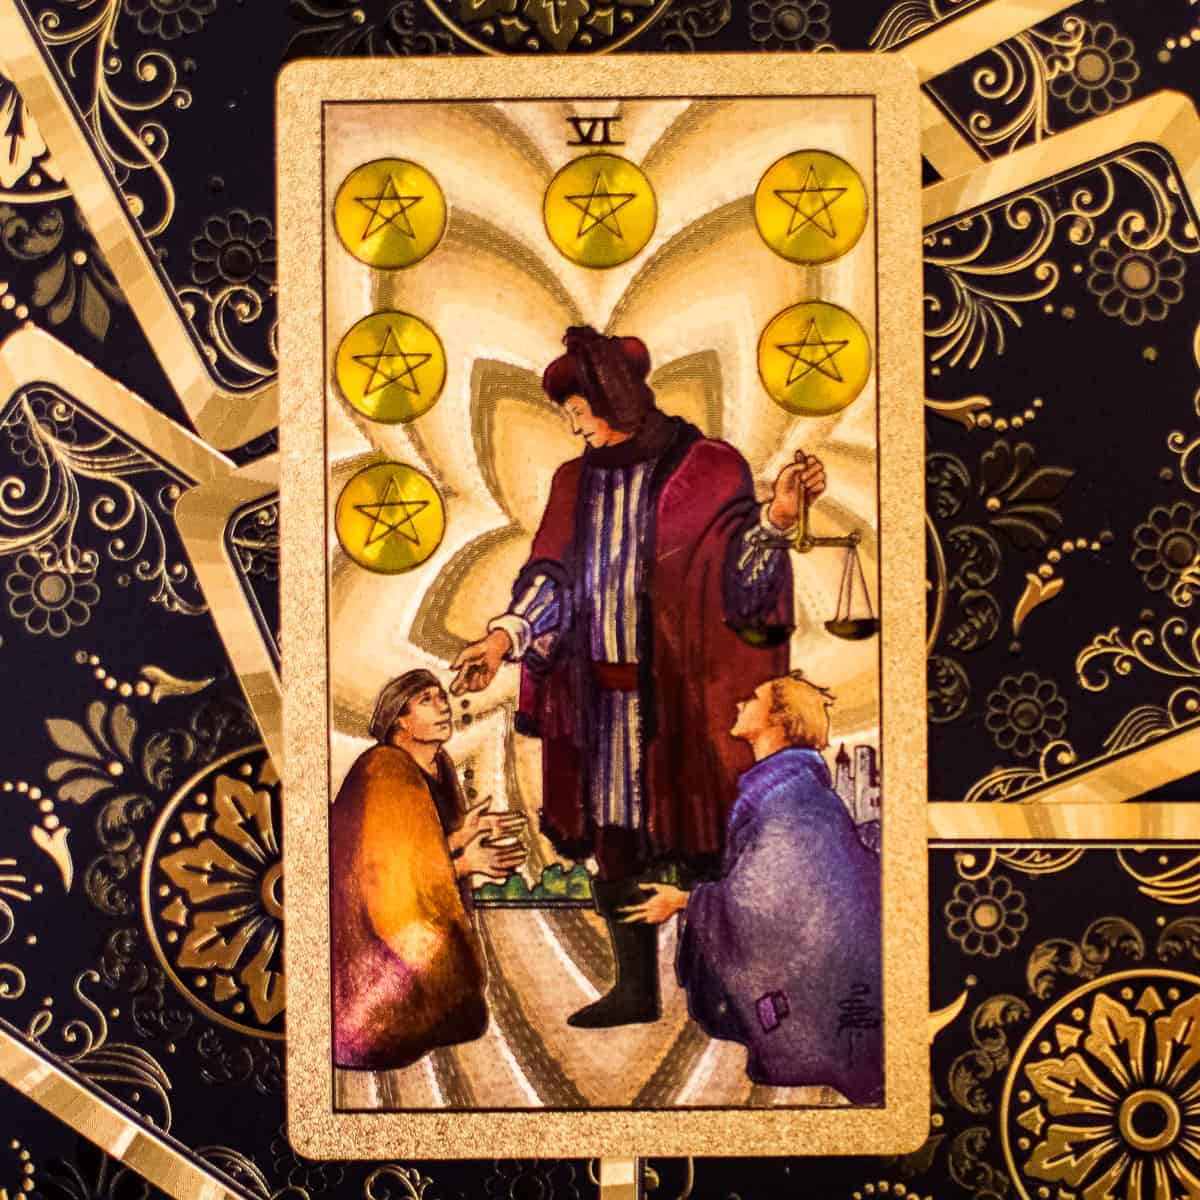 Man with scales equally dividing pentacles between two people depicted on a tarot card.